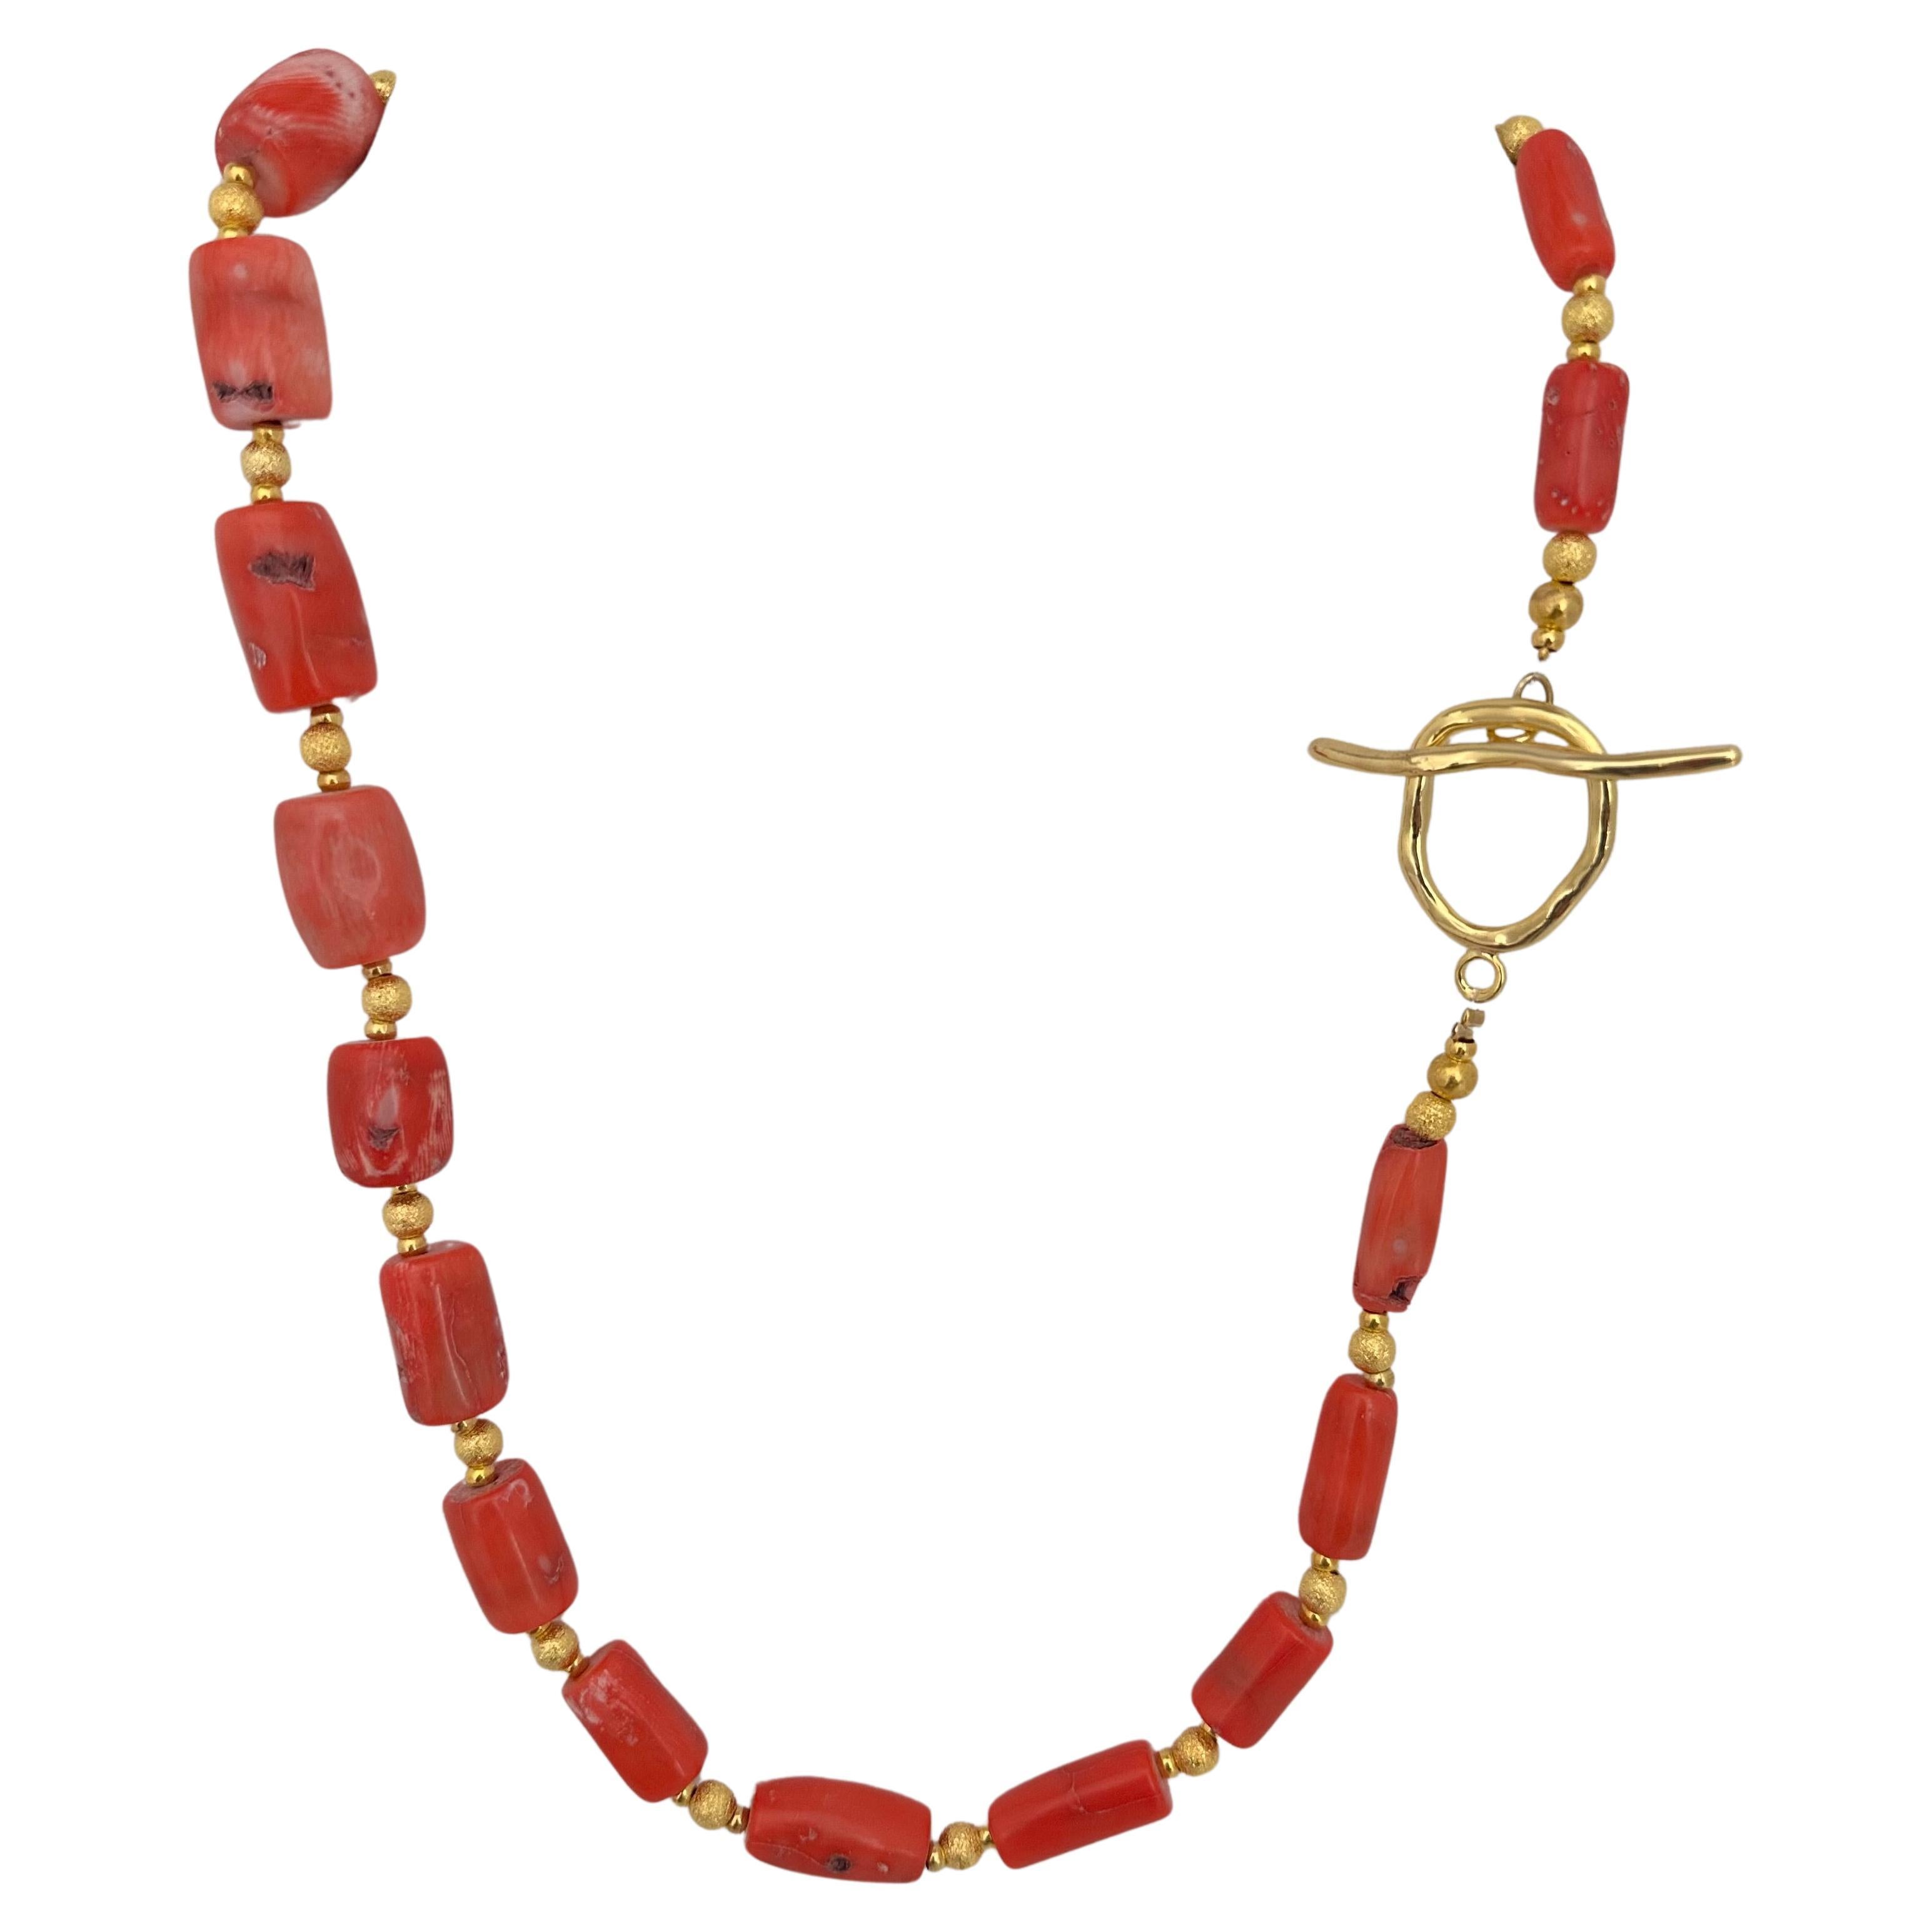 Handmade ~ Gold Beads & Salmon Barrel Shape Coral Beaded 26" Toggle Necklace C51 For Sale